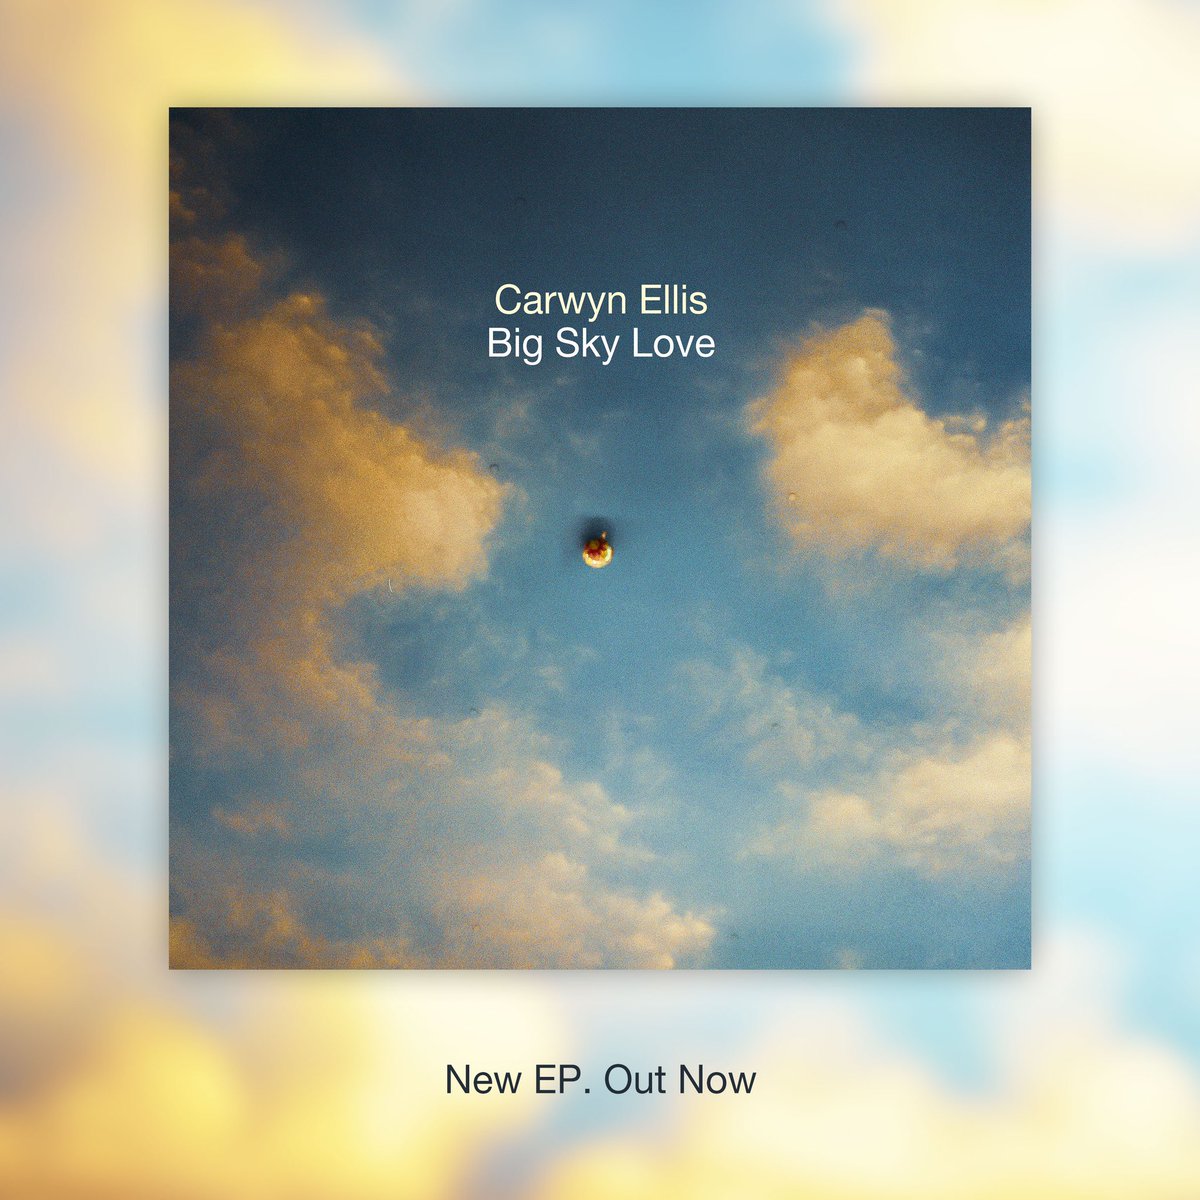 My Big Sky Love EP is out today! With the title track (which includes perfect vocals by @elanmererid) it features three additional tracks: Cherry Blossom Promenade, Just So You Know (featuring beautiful cello by @lizhankscello) and Drift Away. Enjoy! album.link/pgbsvhcngm7cn